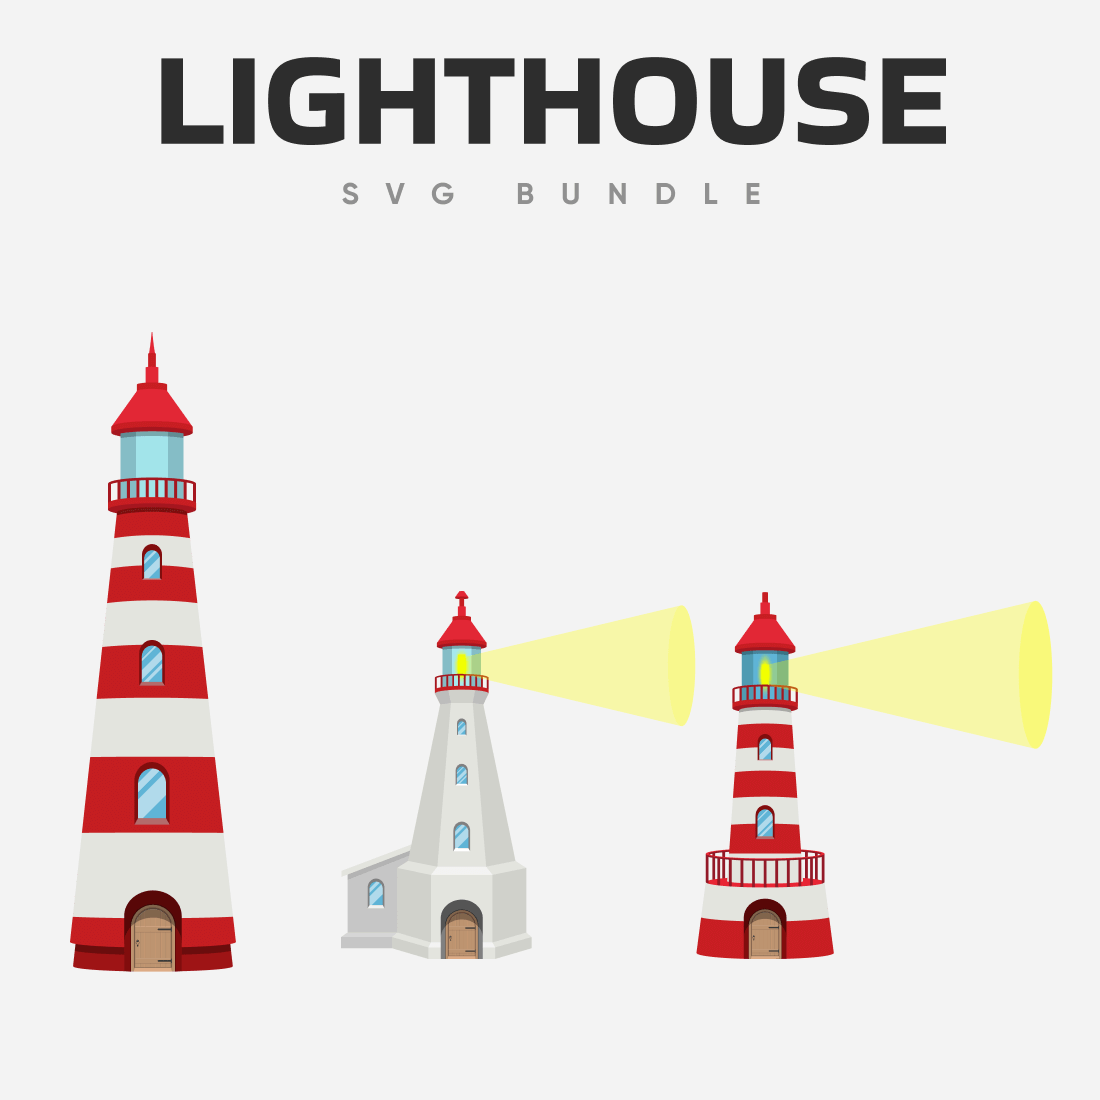 Lighthouse in red and white with lights on and off.